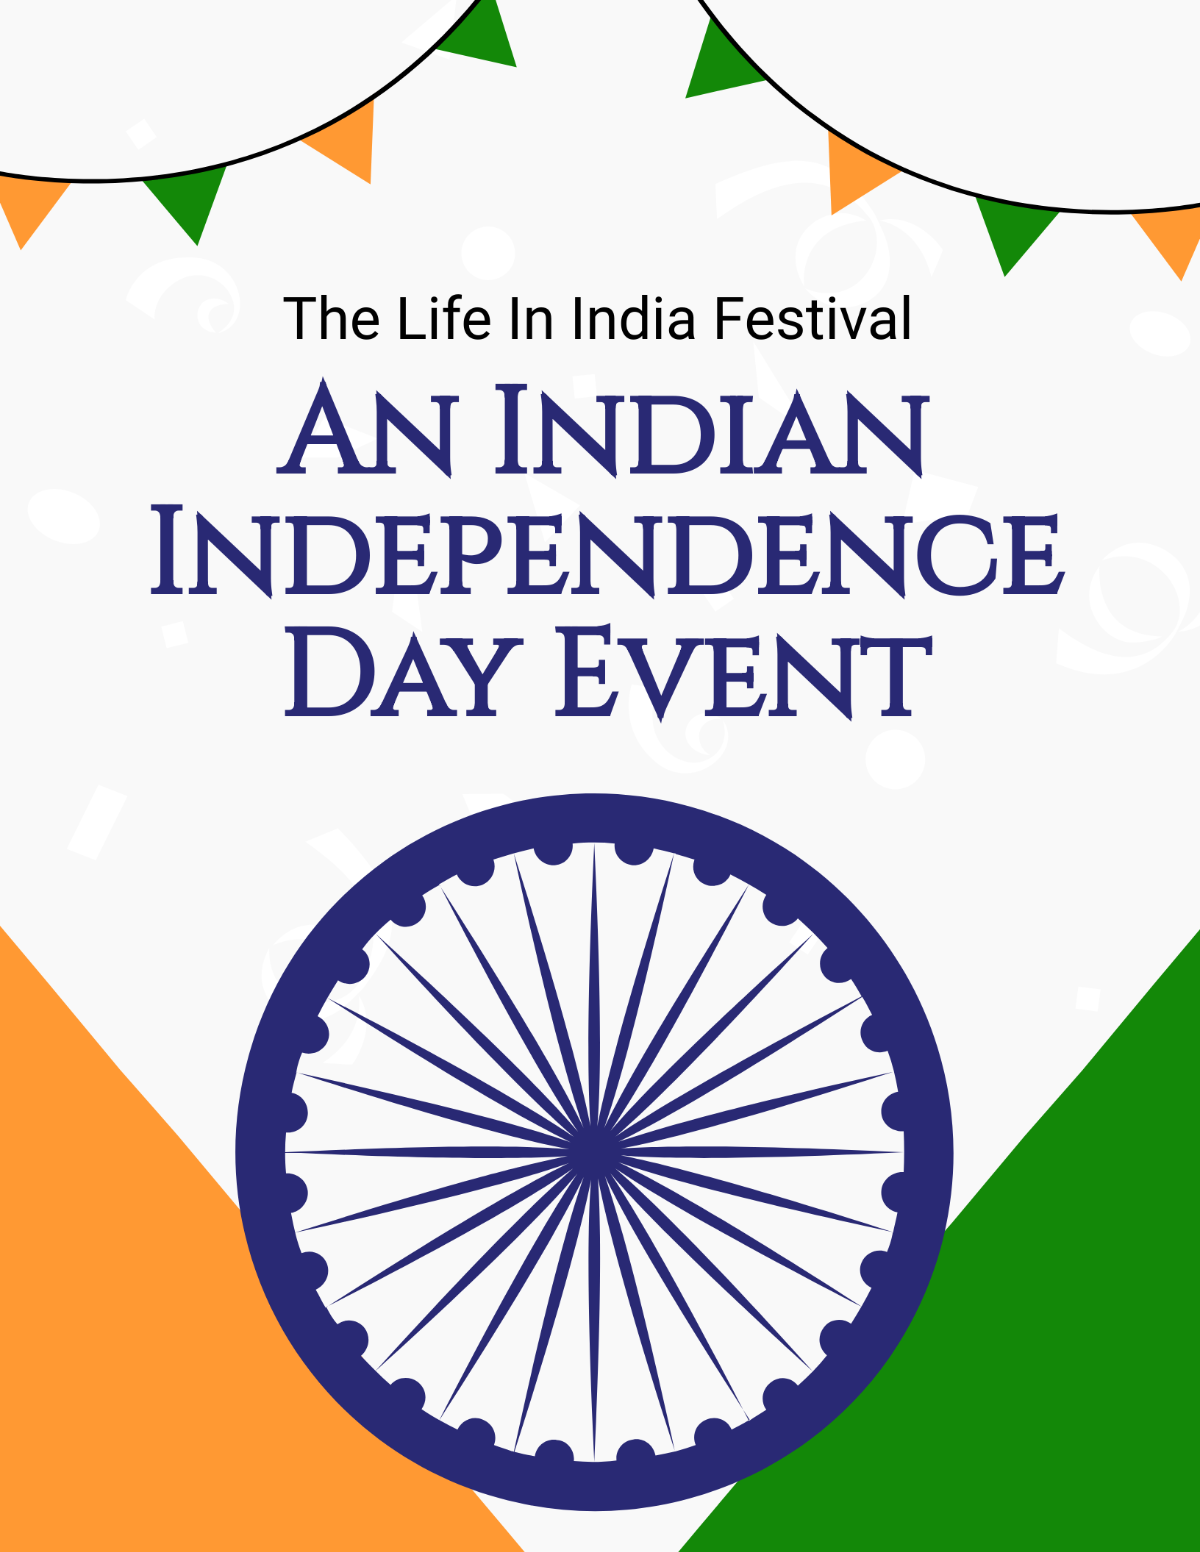 Free Indian Independence Day Event Flyer Template